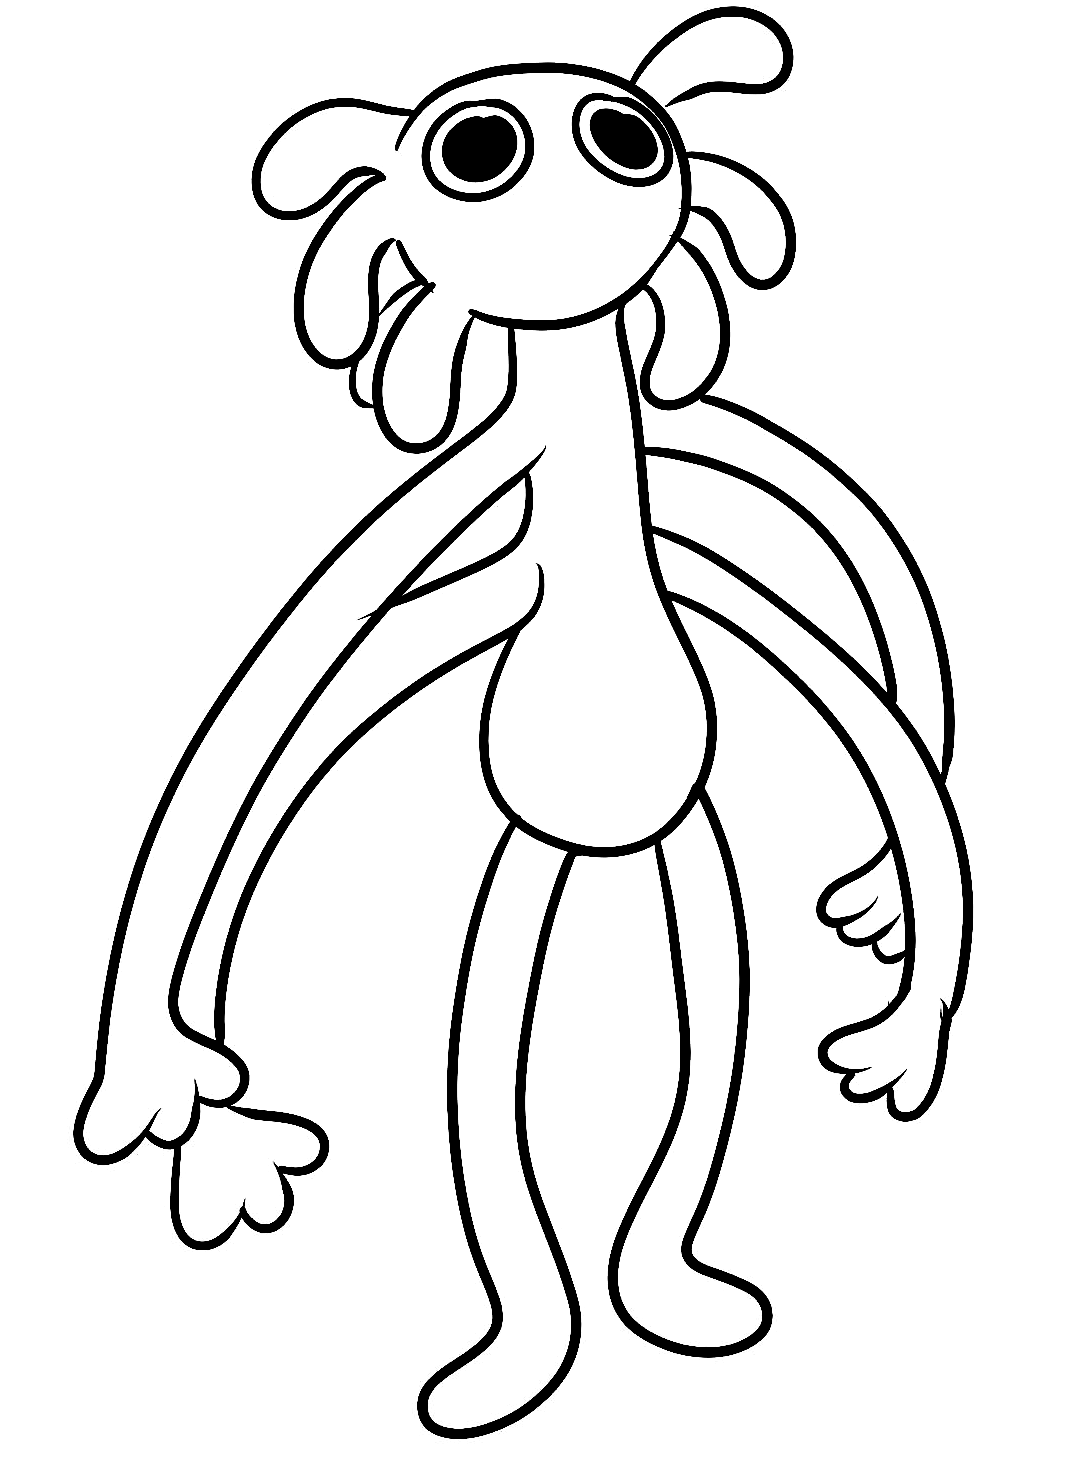 Yellow Spider from Rainbow Friends Coloring Pages